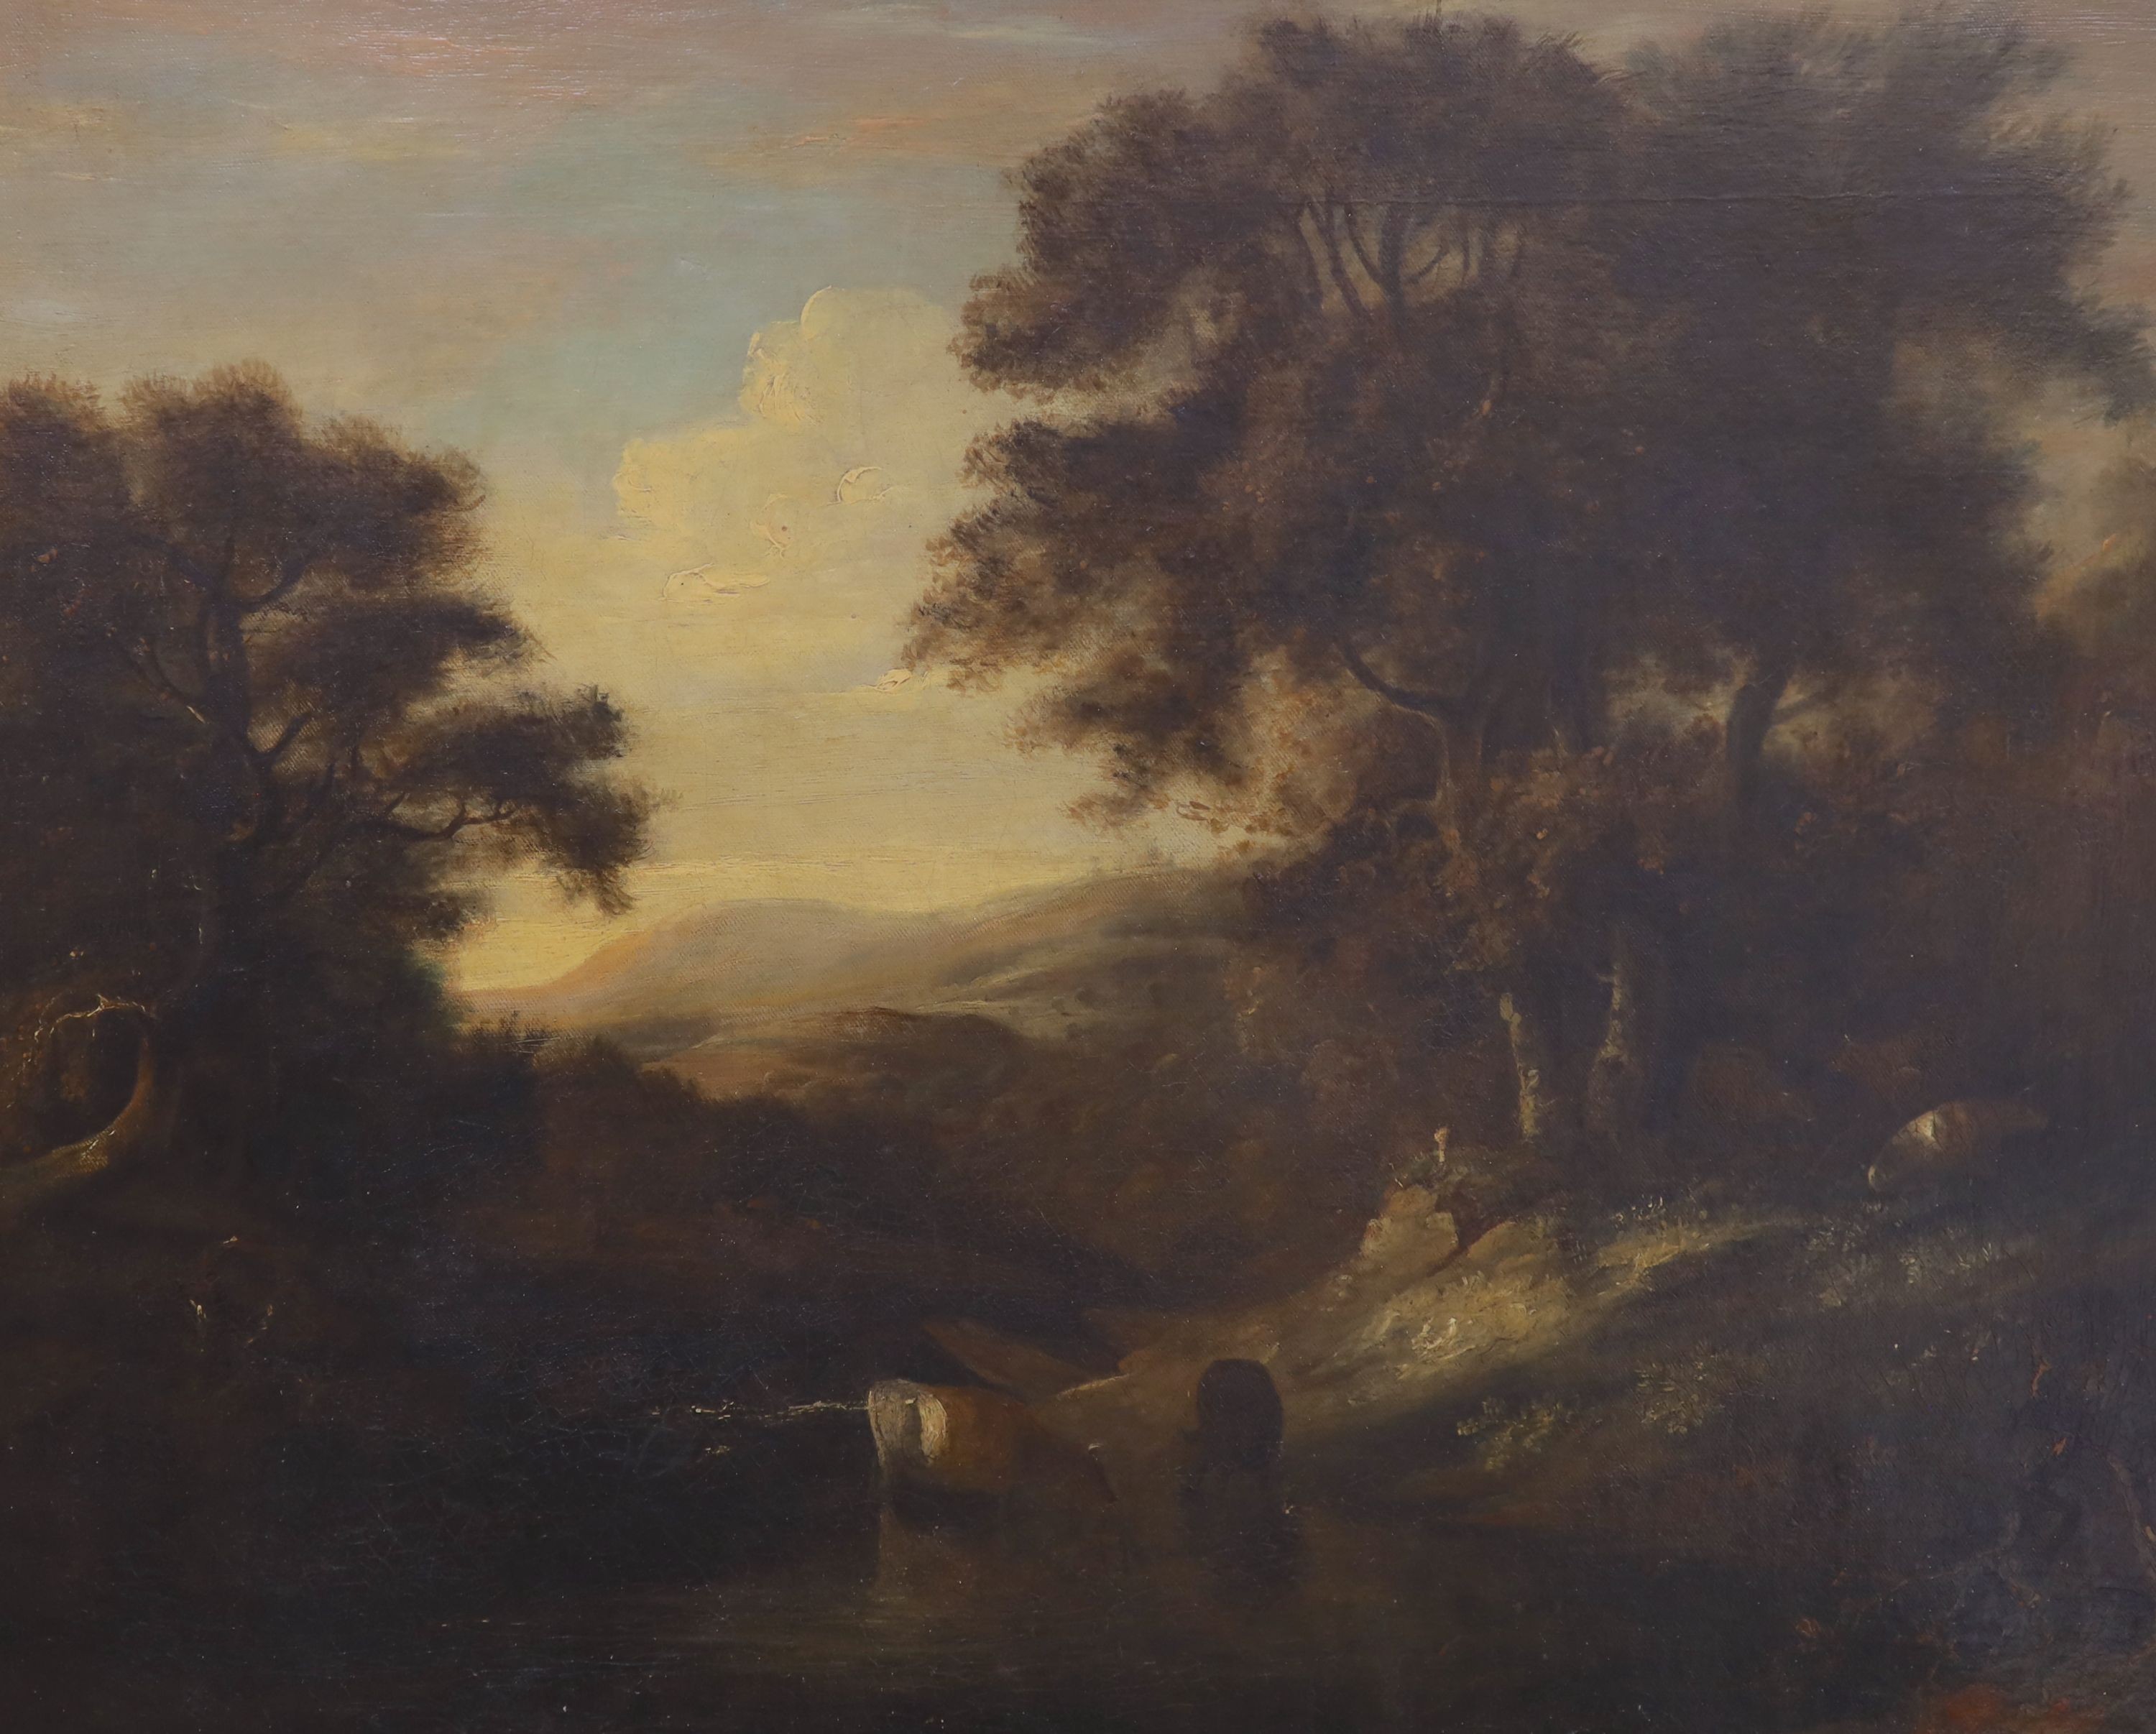 19th century English School, oil on canvas, Cattle watering in a landscape, 49 x 59cm